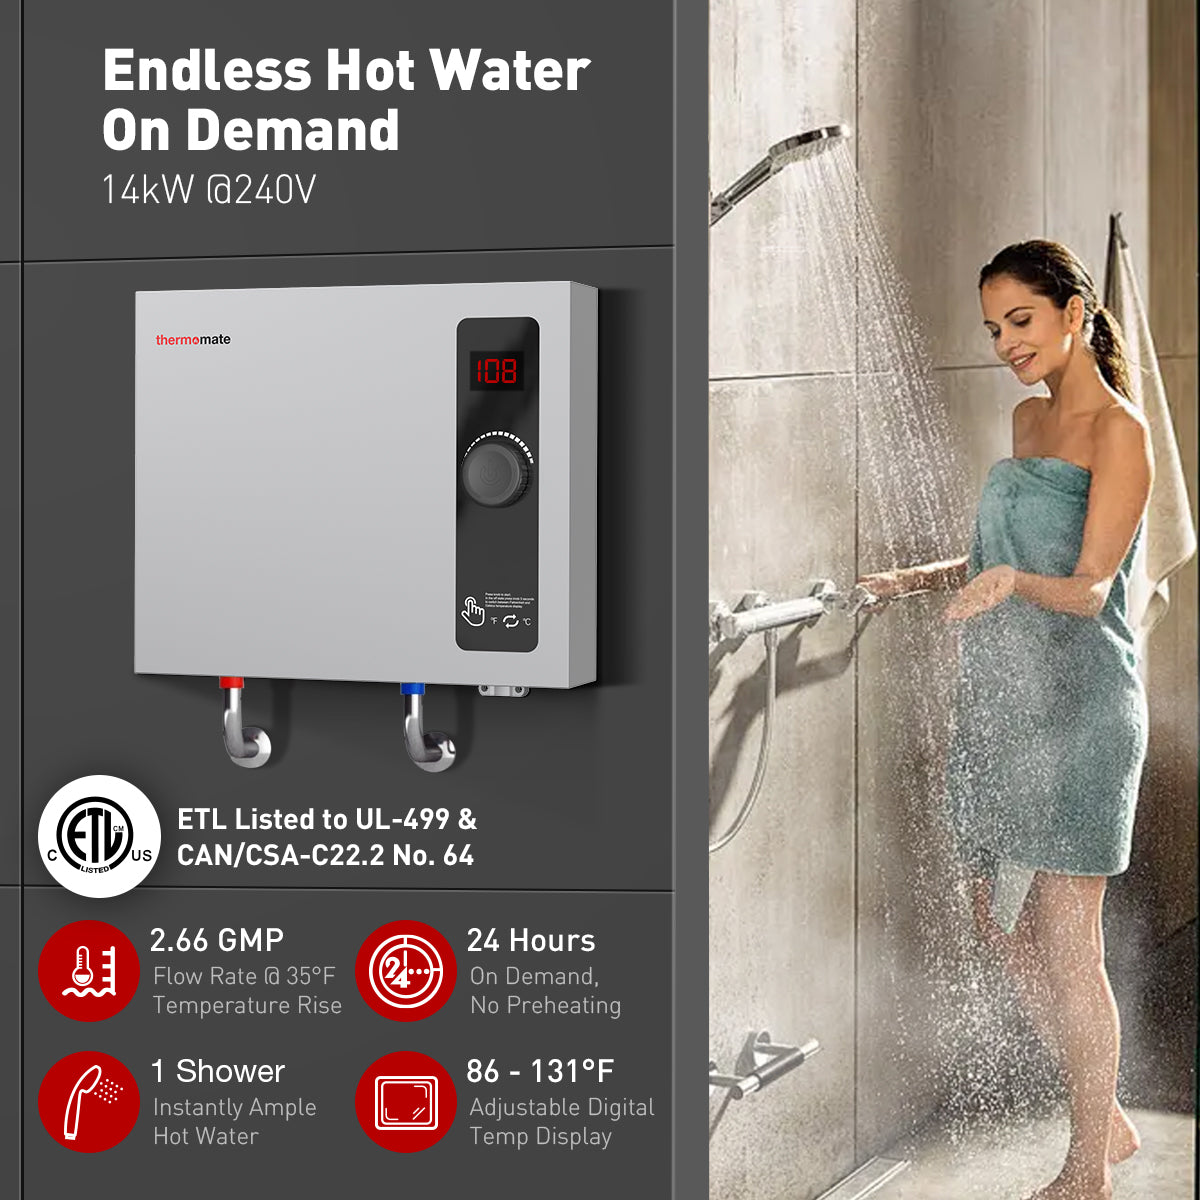 On Demand Endless Hot Water | Thermomate